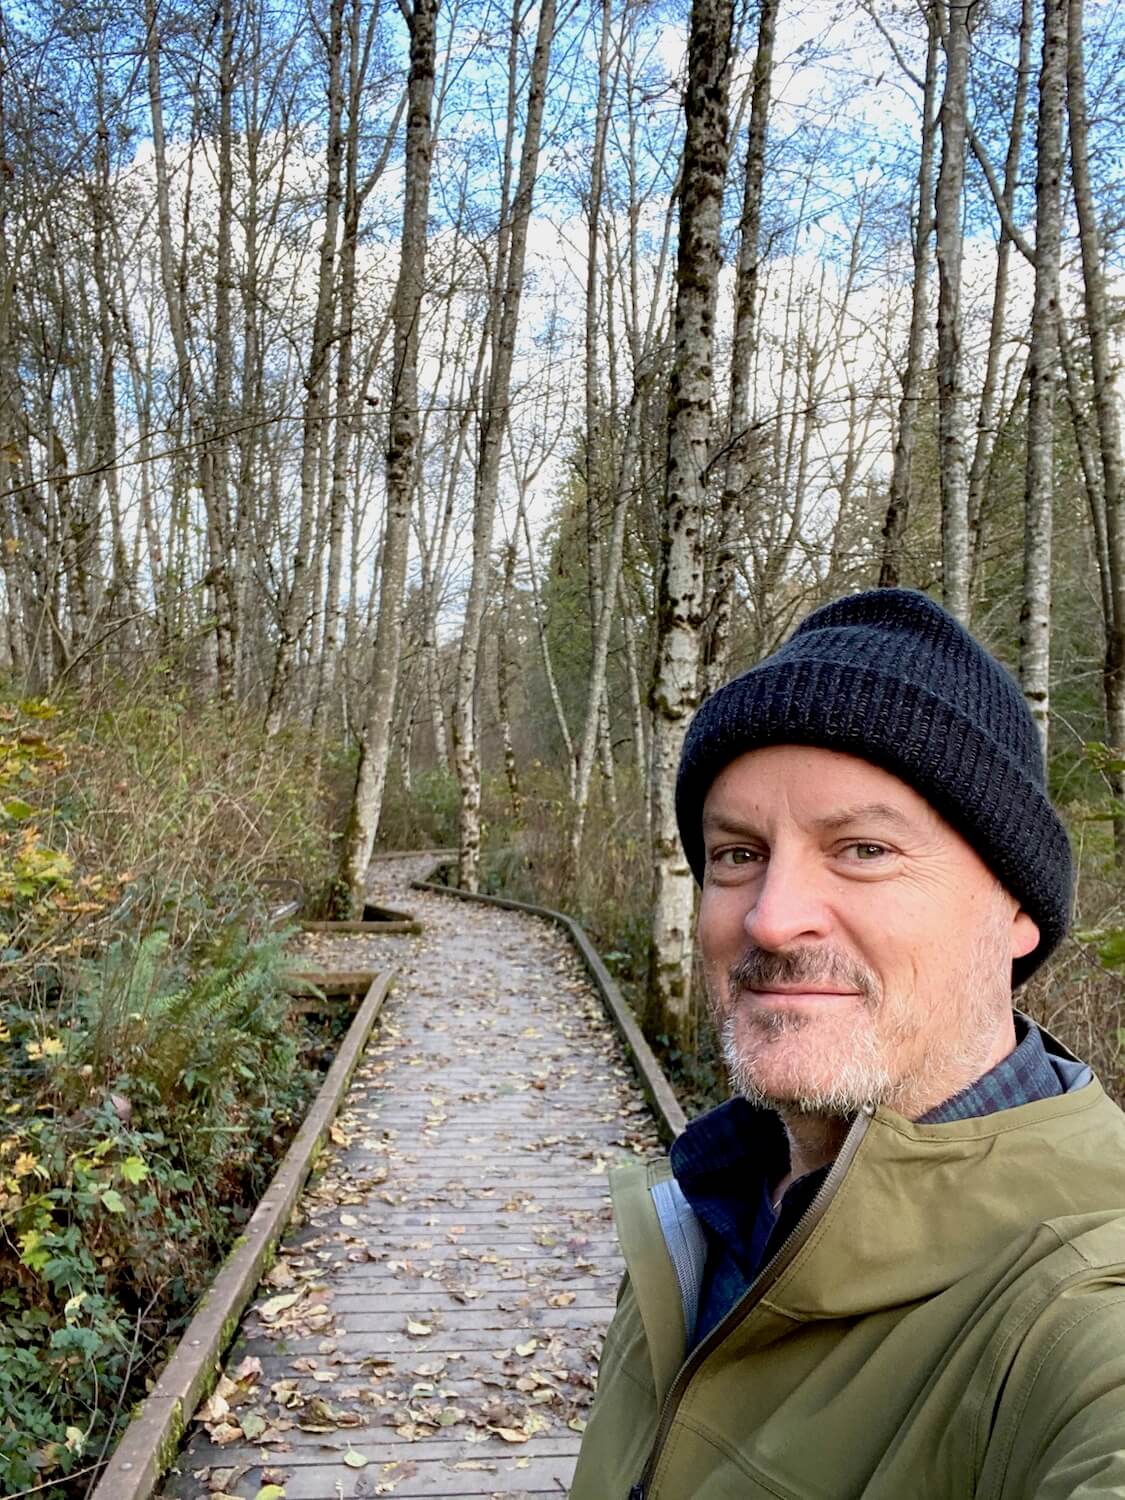 Matthew Kessi stands on a boardwalk smiling at the camera. He is wearing a black woven hat and a green rain jacket. There are birch trees in the background without leaves.